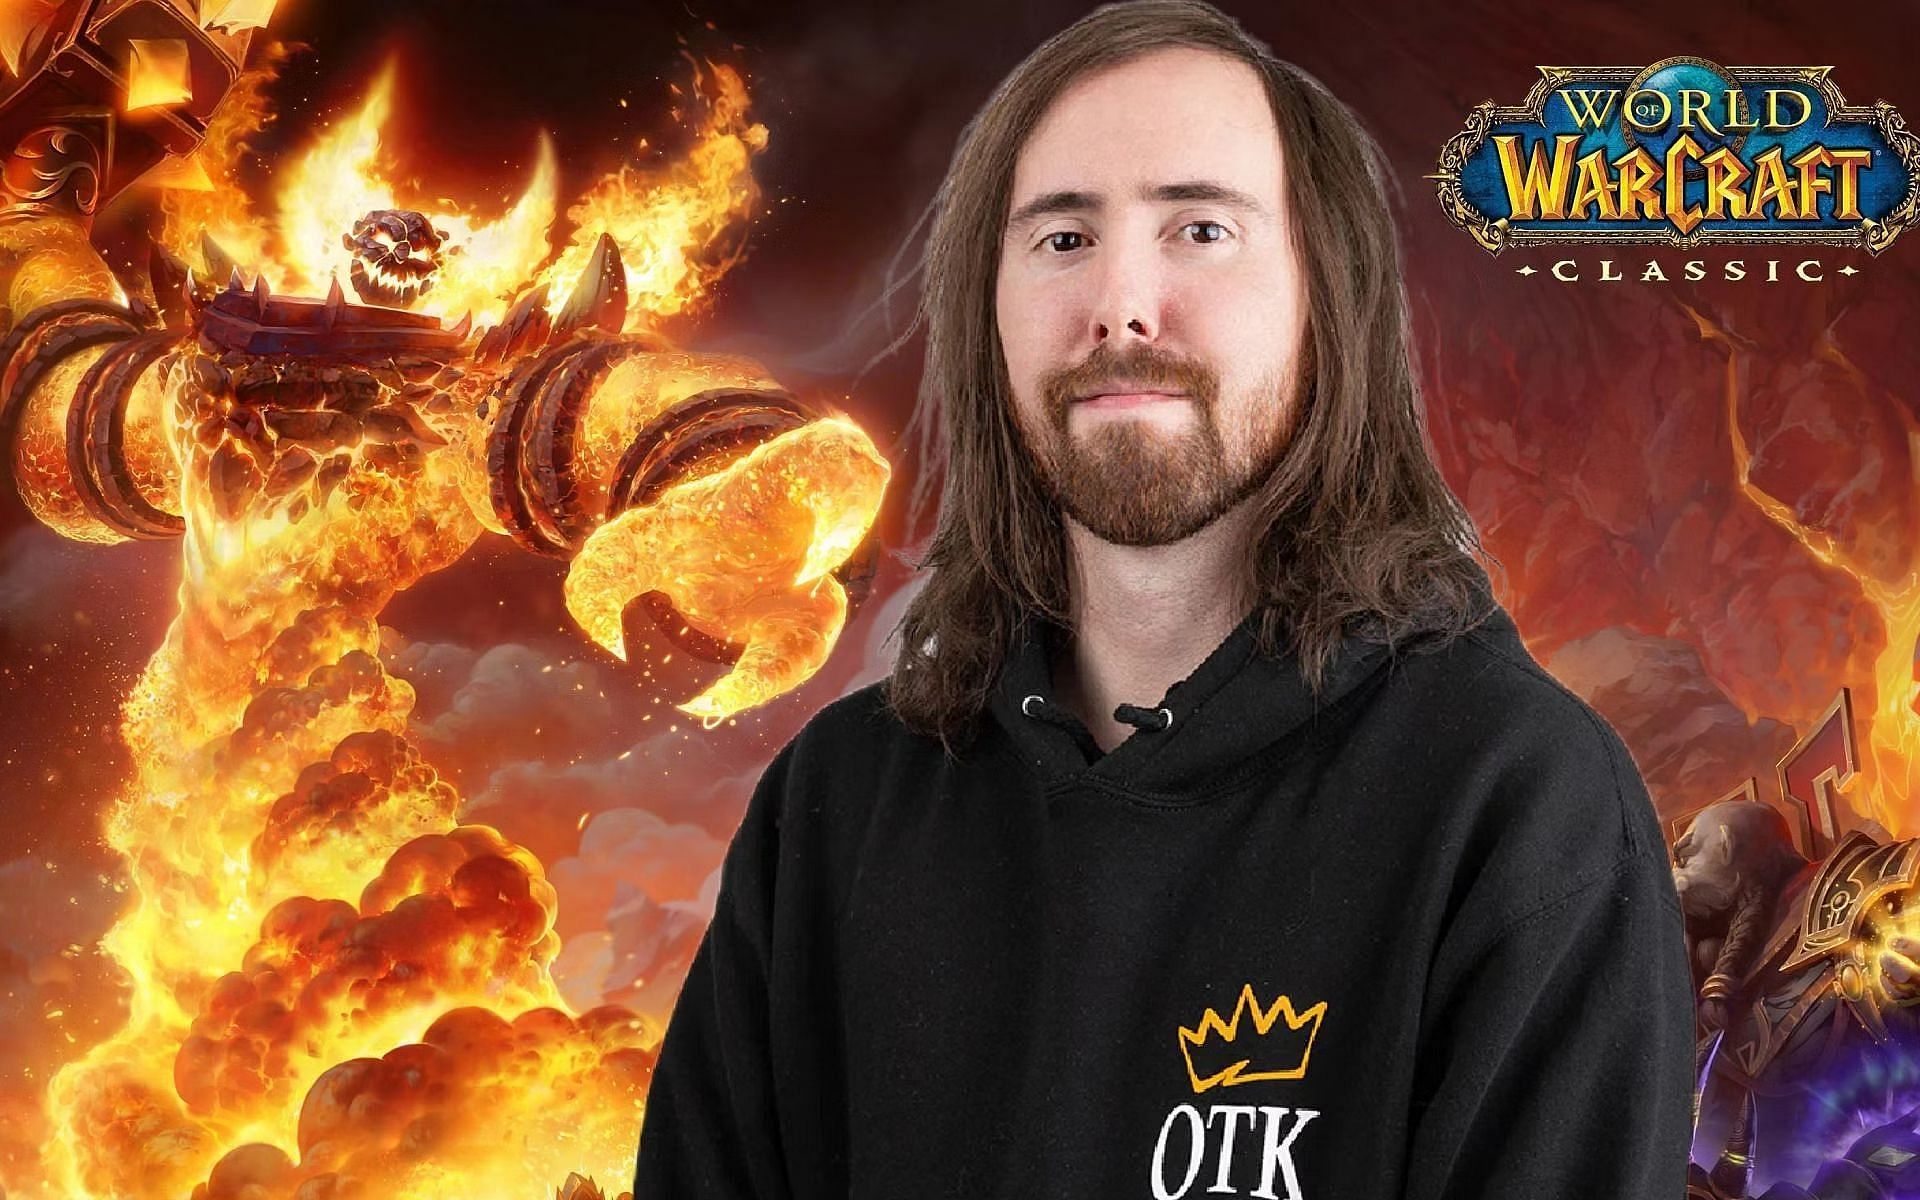 Asmongold unbanned from World of Warcraft (Image via OTK and World of Warcraft Classic)